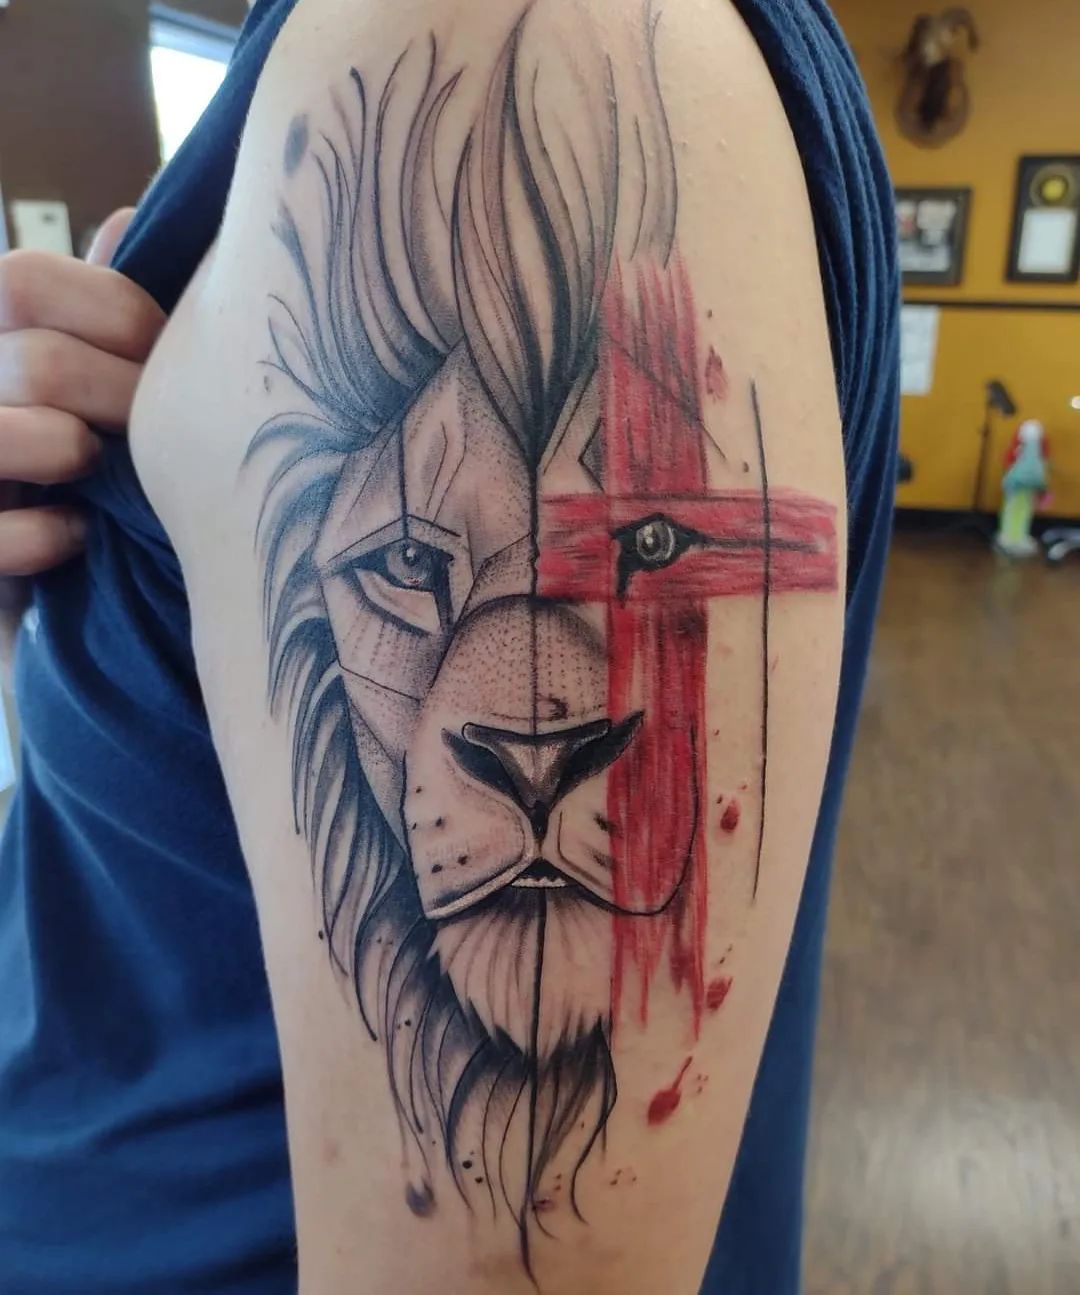 Throught the history, many cultures have featured lions in their texts and many artworks can be seen featuring lions. It's because these animals are a symbol of strength, courage and fearlessness. To combine a lion tattoo with a cross is a good idea for that since all these meanings above can be associated with Jesus. Red cross symbolizes the blood from his crucifixion.